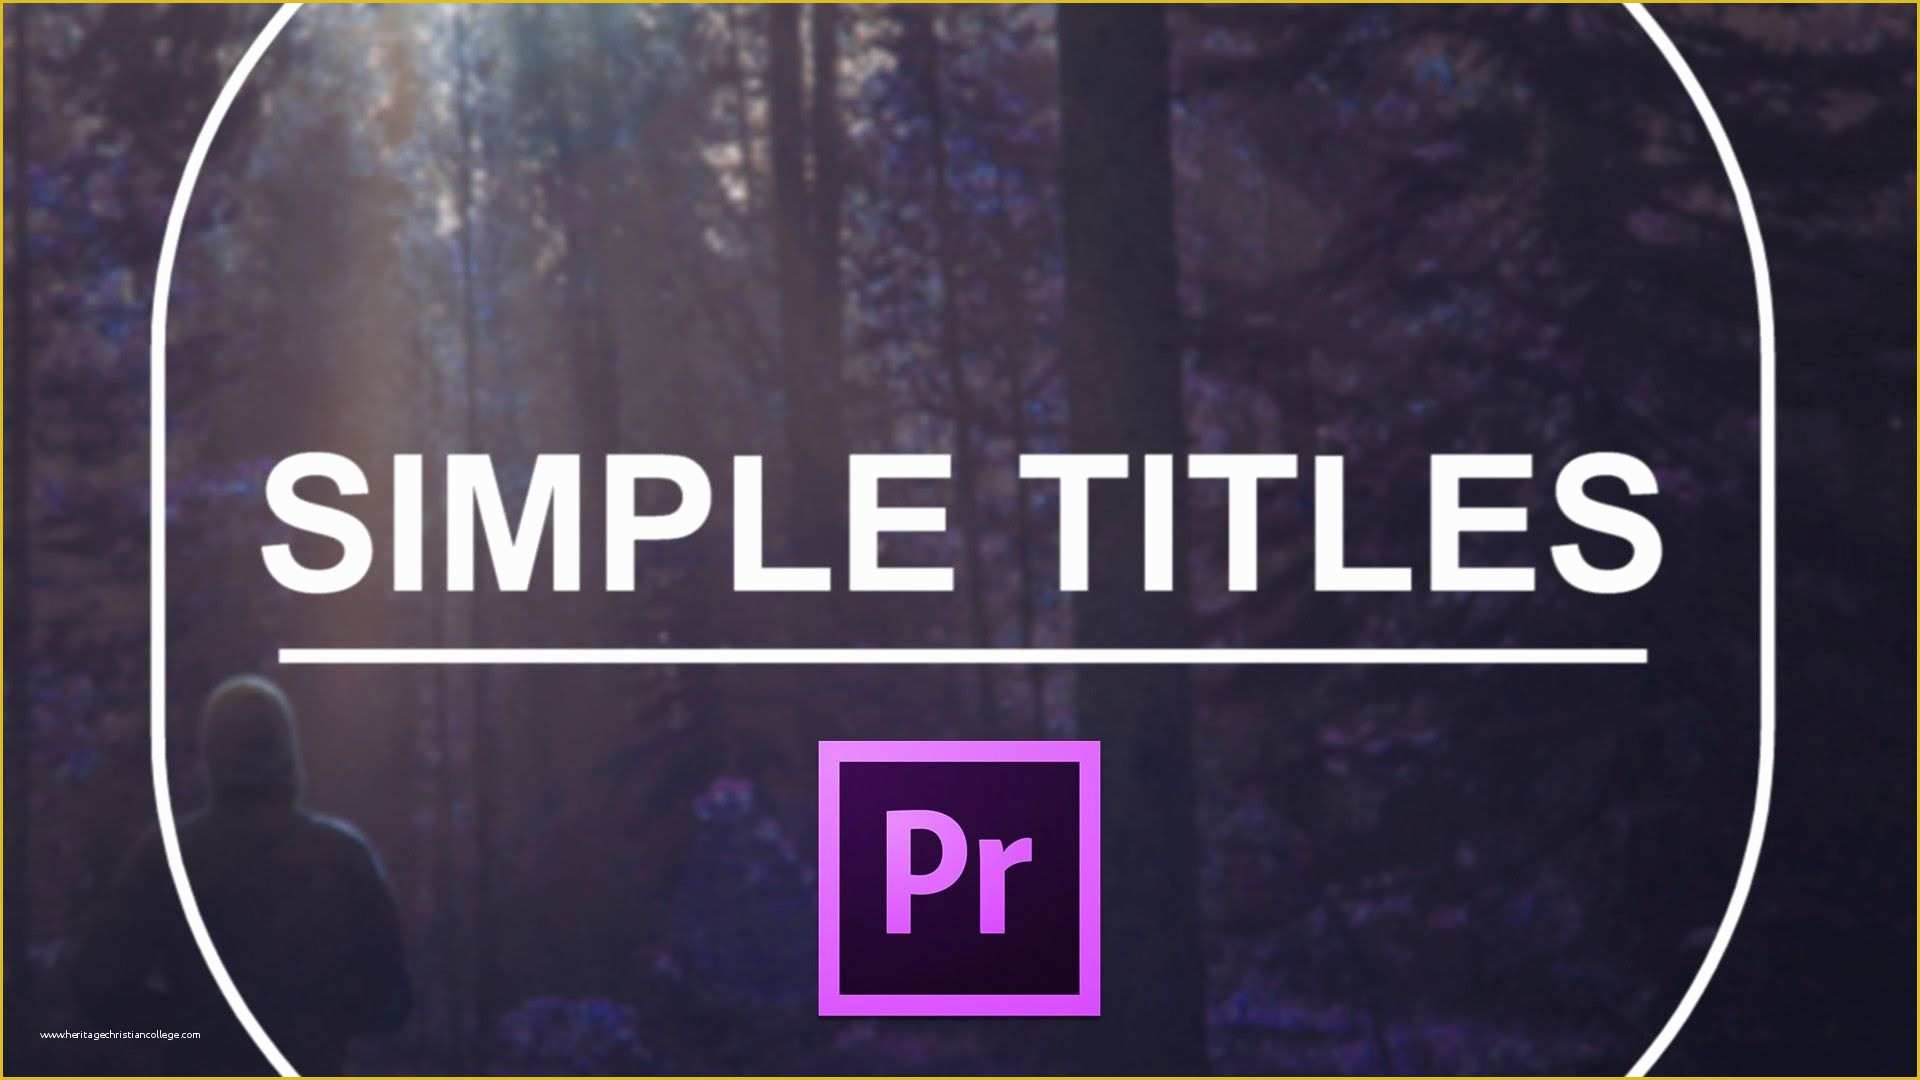 Adobe Premiere Title Templates Free Of Simple Titles is A Bundle Of 10 Title Templates for